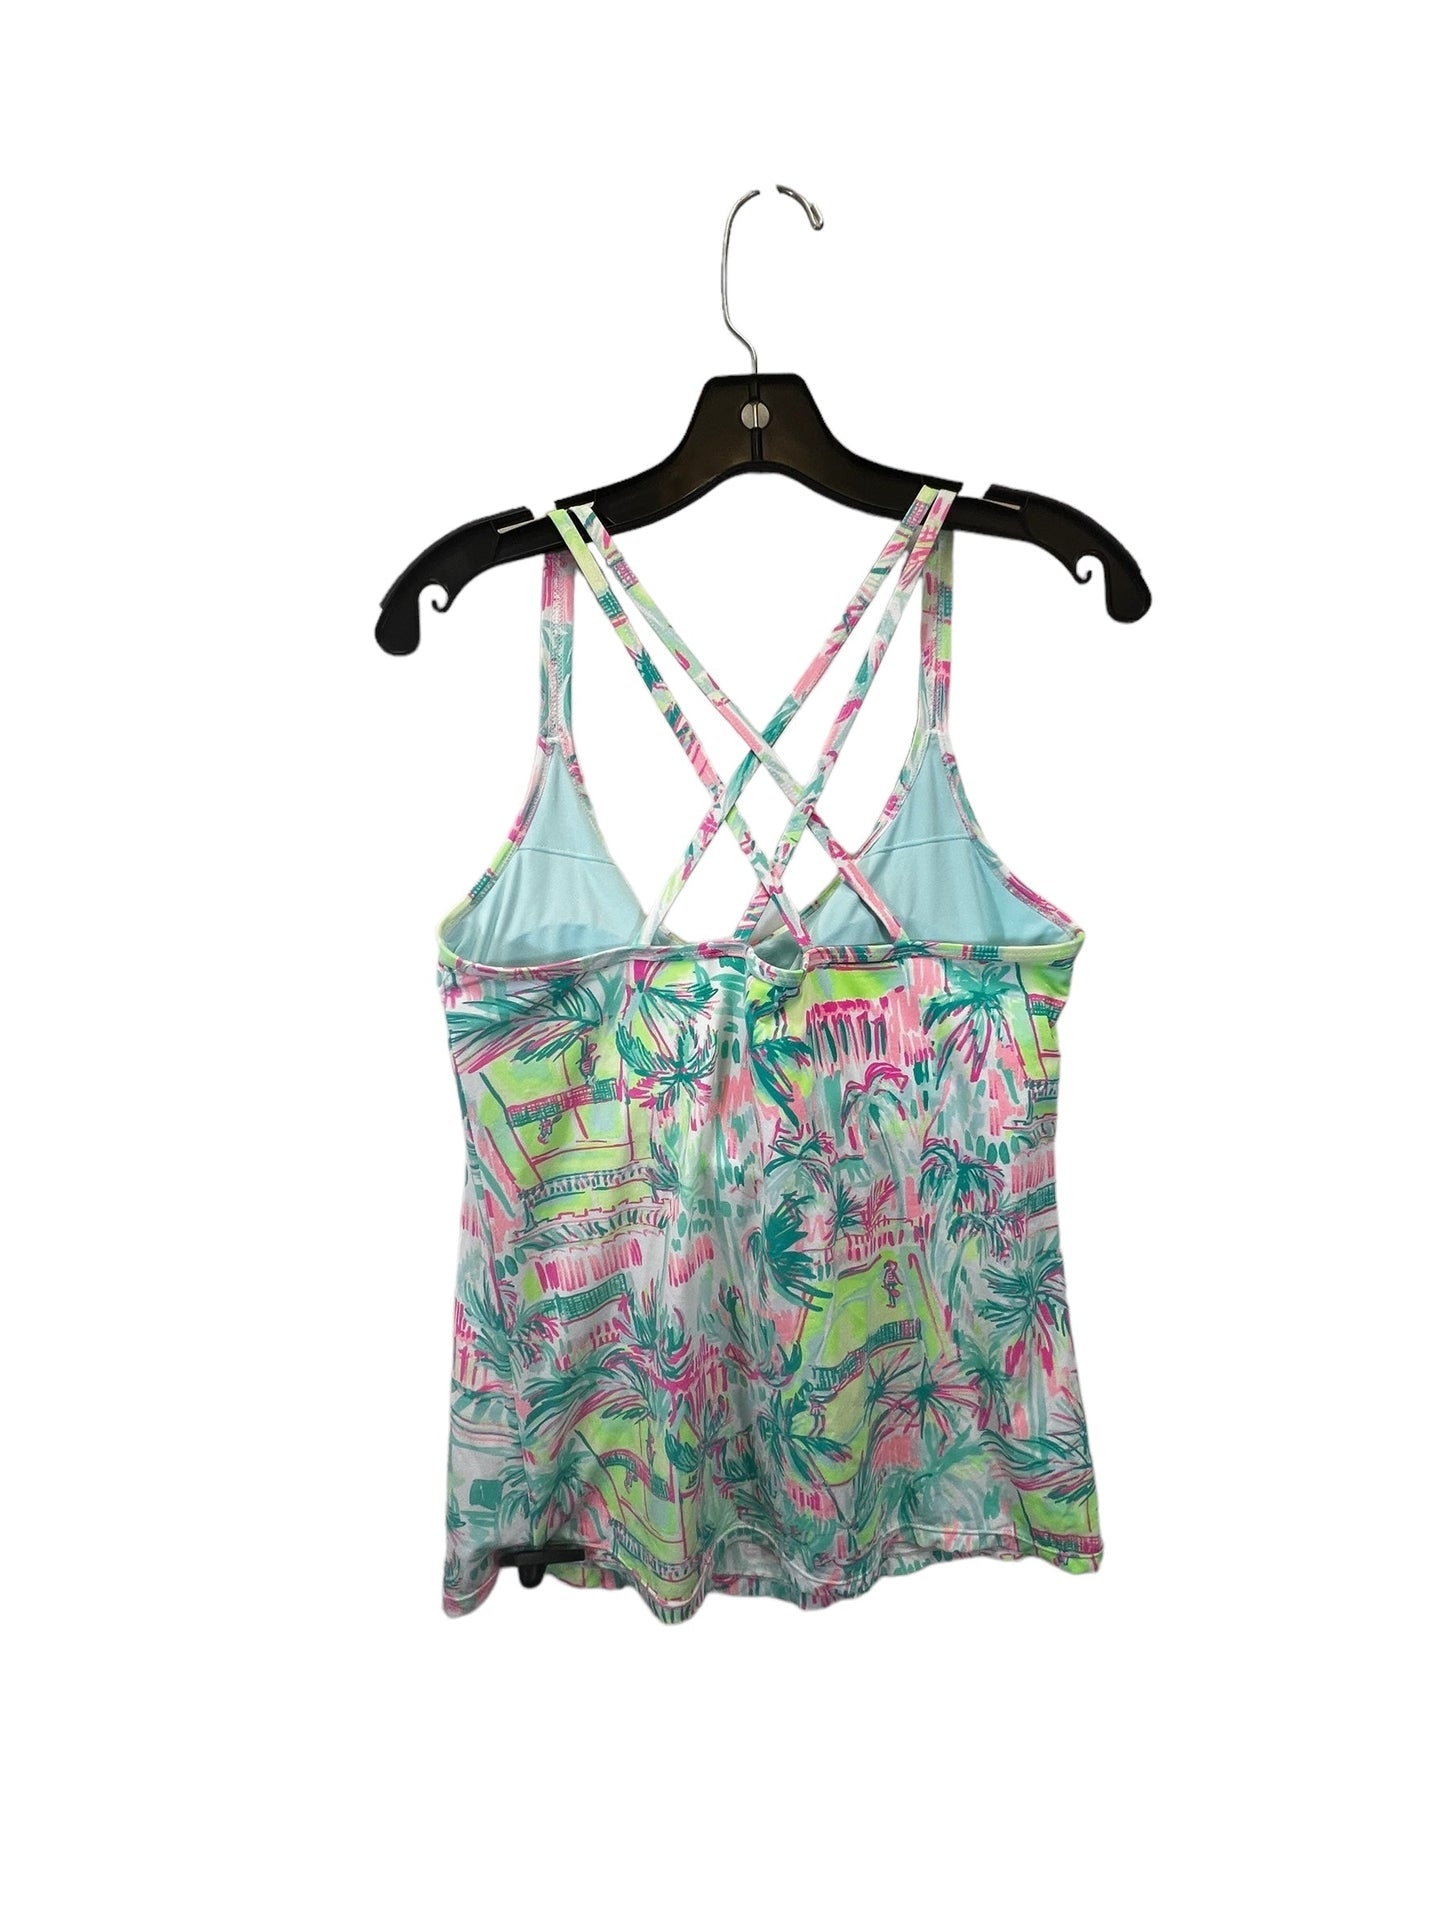 Green & Pink Athletic Tank Top Lilly Pulitzer, Size L